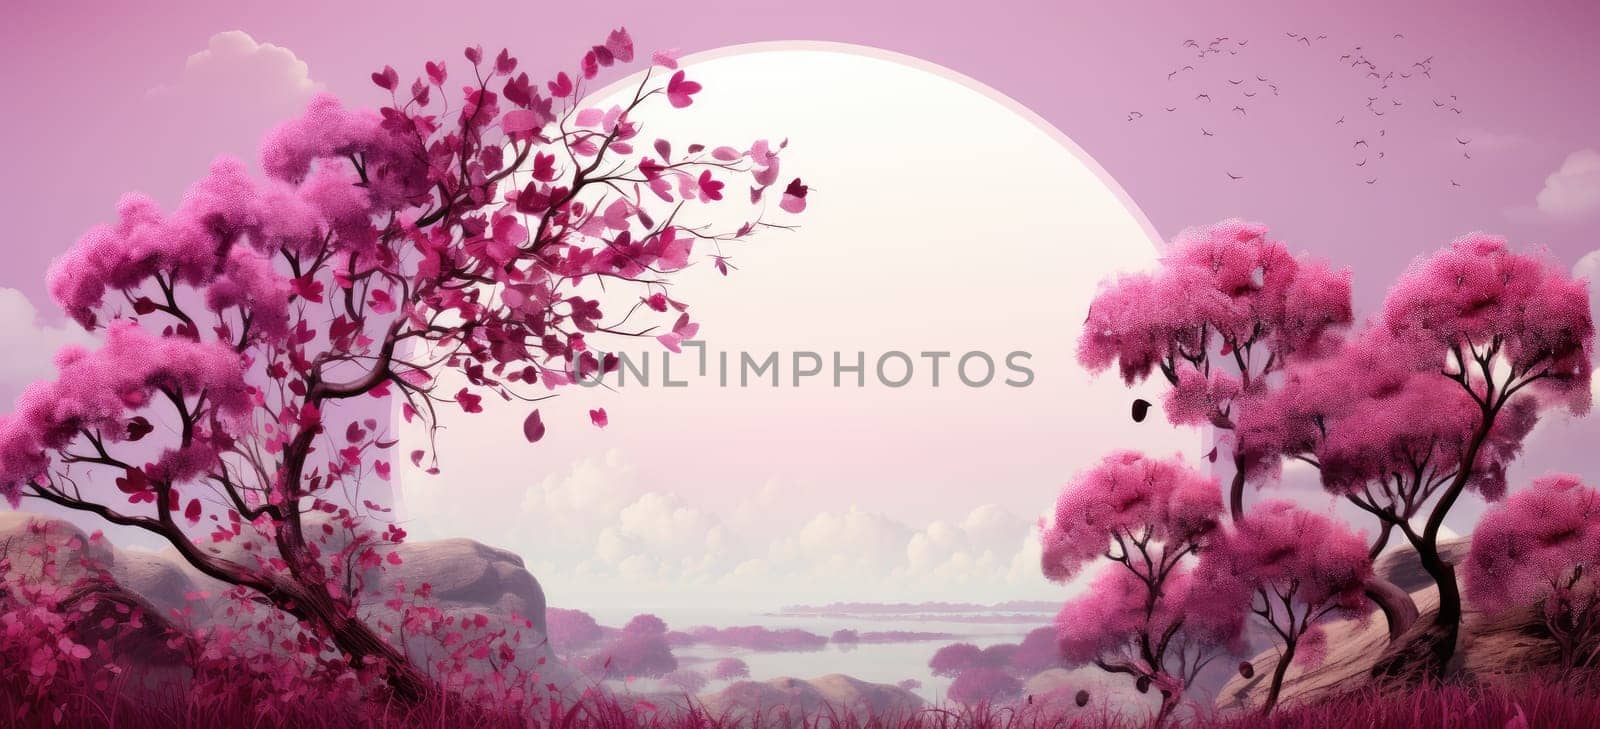 This beautiful postcard features a family tree in purple and pink tones